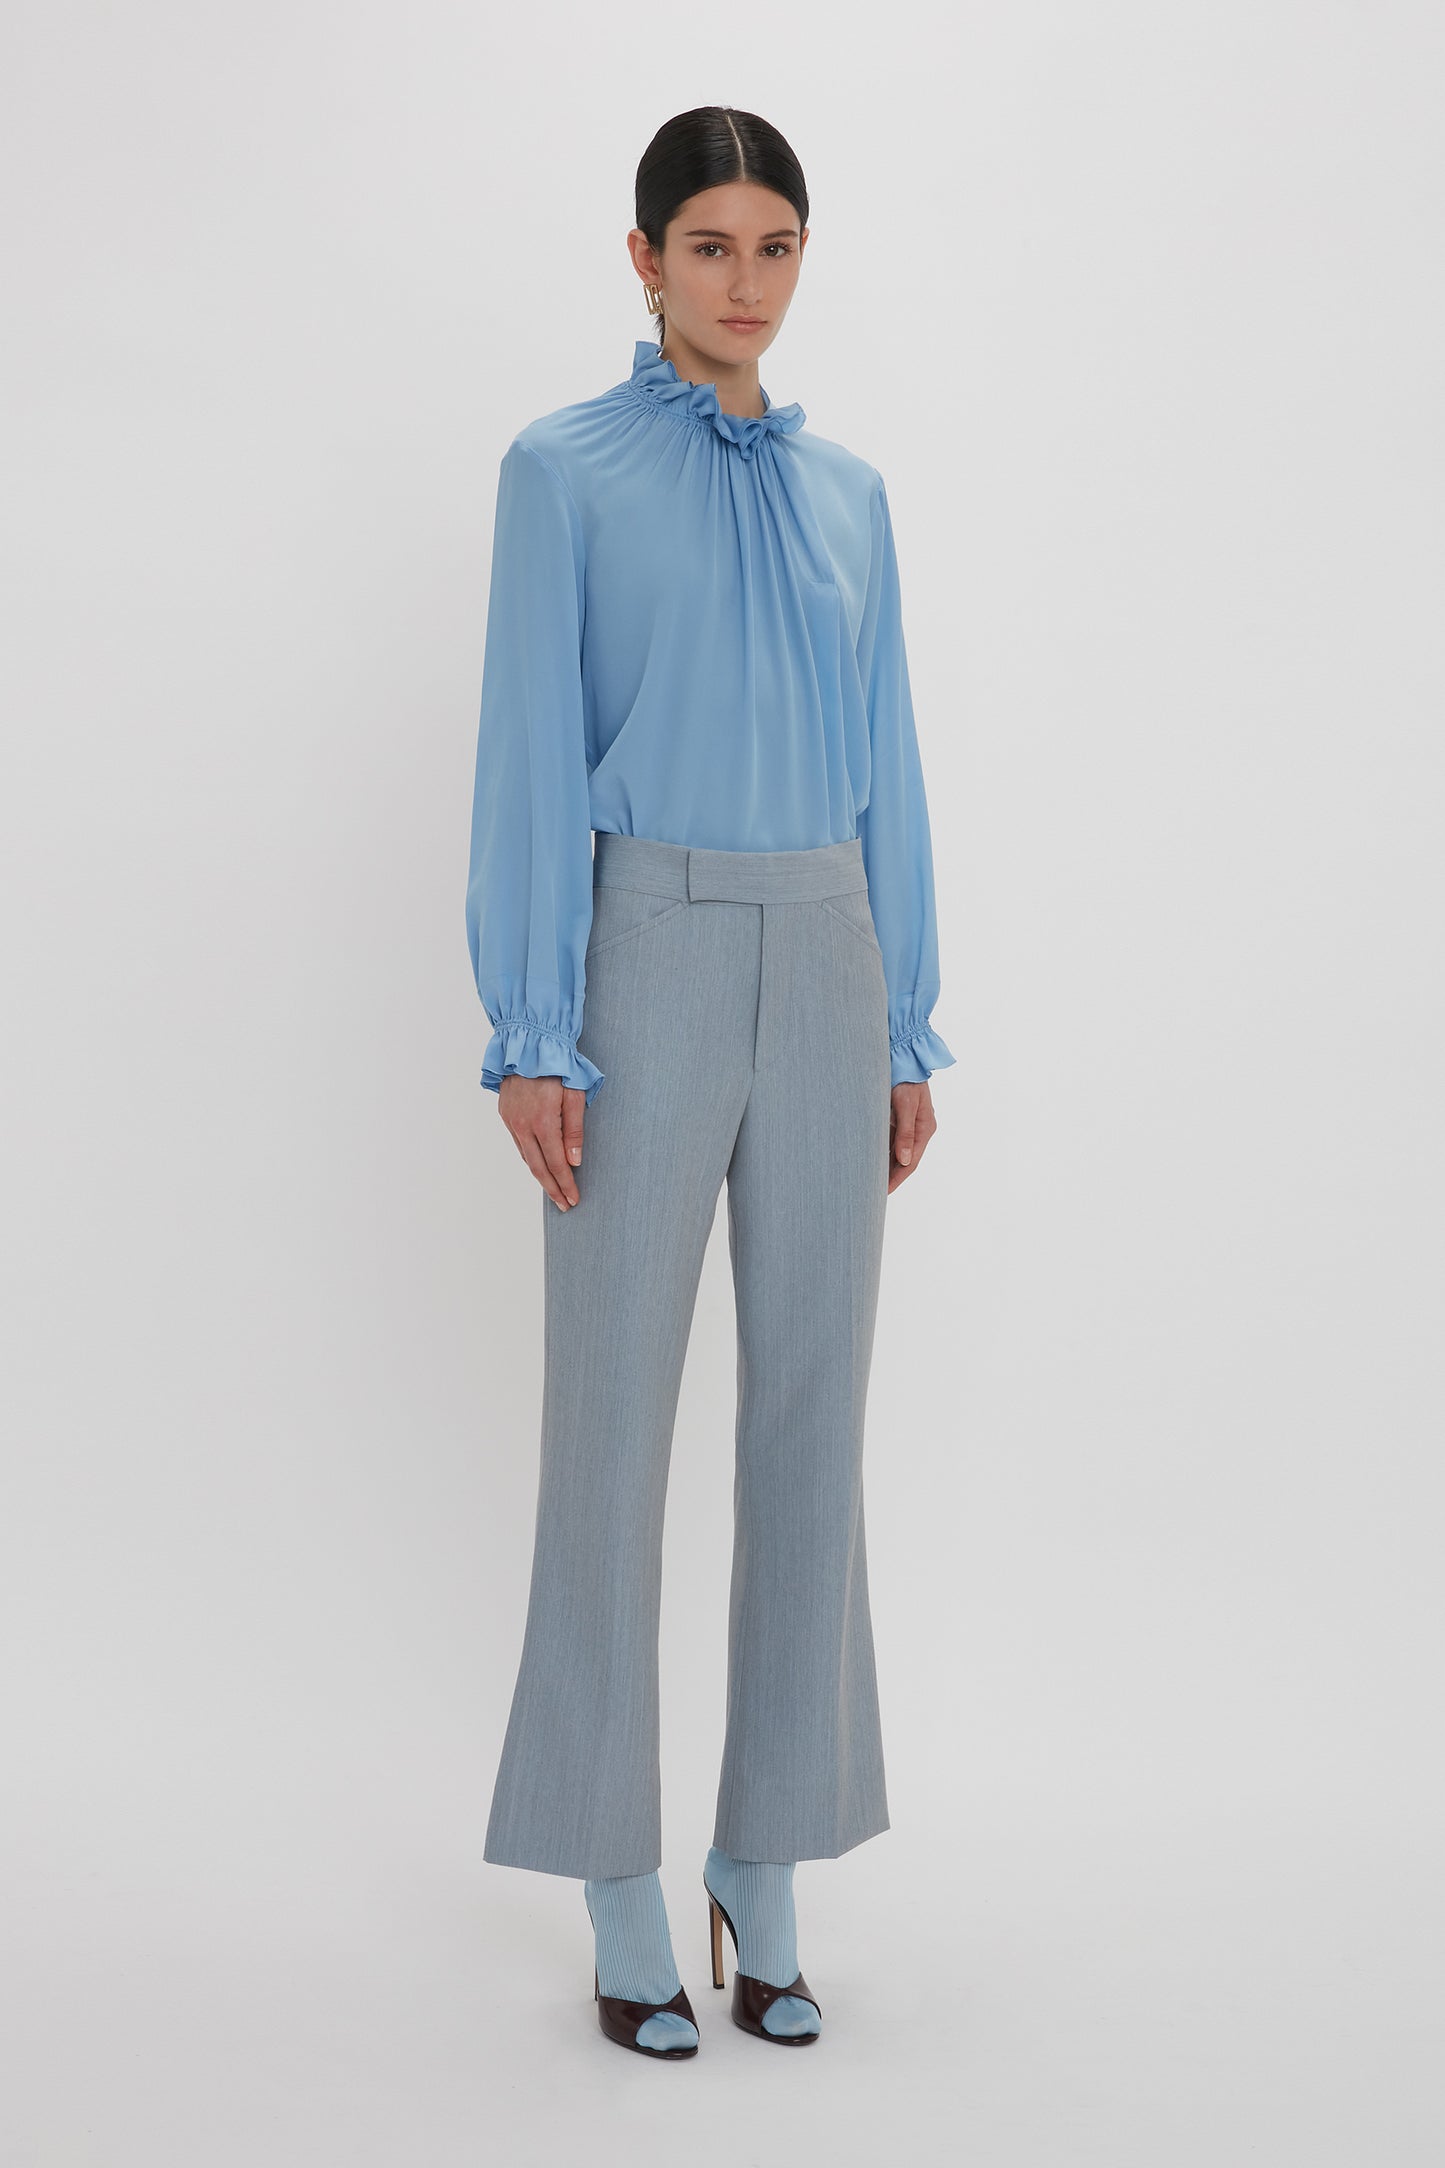 A person stands against a plain background, wearing the Victoria Beckham Exclusive Ruffle Neck Blouse In Cornflower Blue, paired with high-waisted, light gray pants and matching cornflower blue heels.